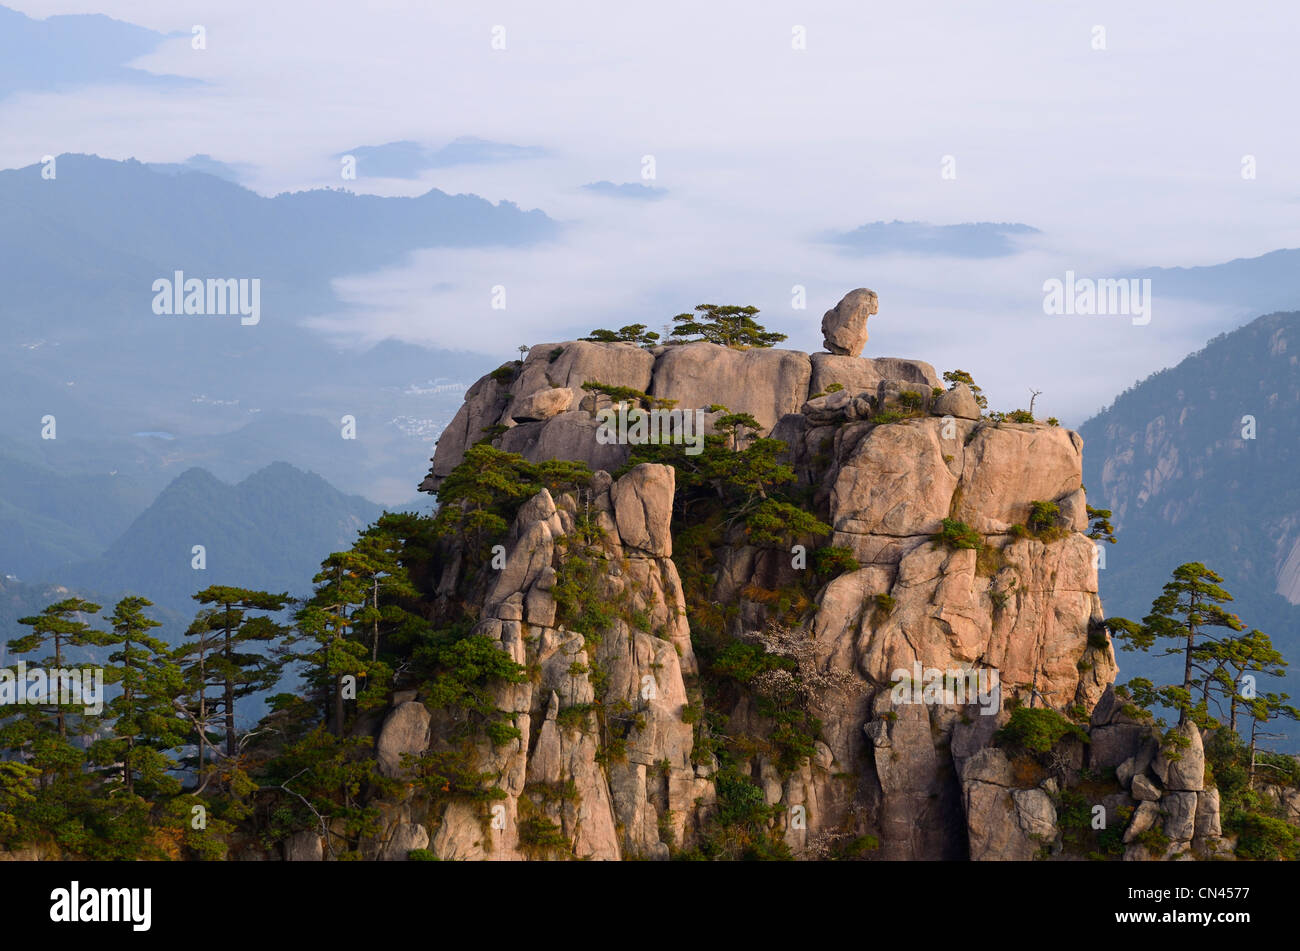 Pre dawn Monkey watching the Sea Peak with fog in valley at Huangshan Yellow Mountain China Stock Photo